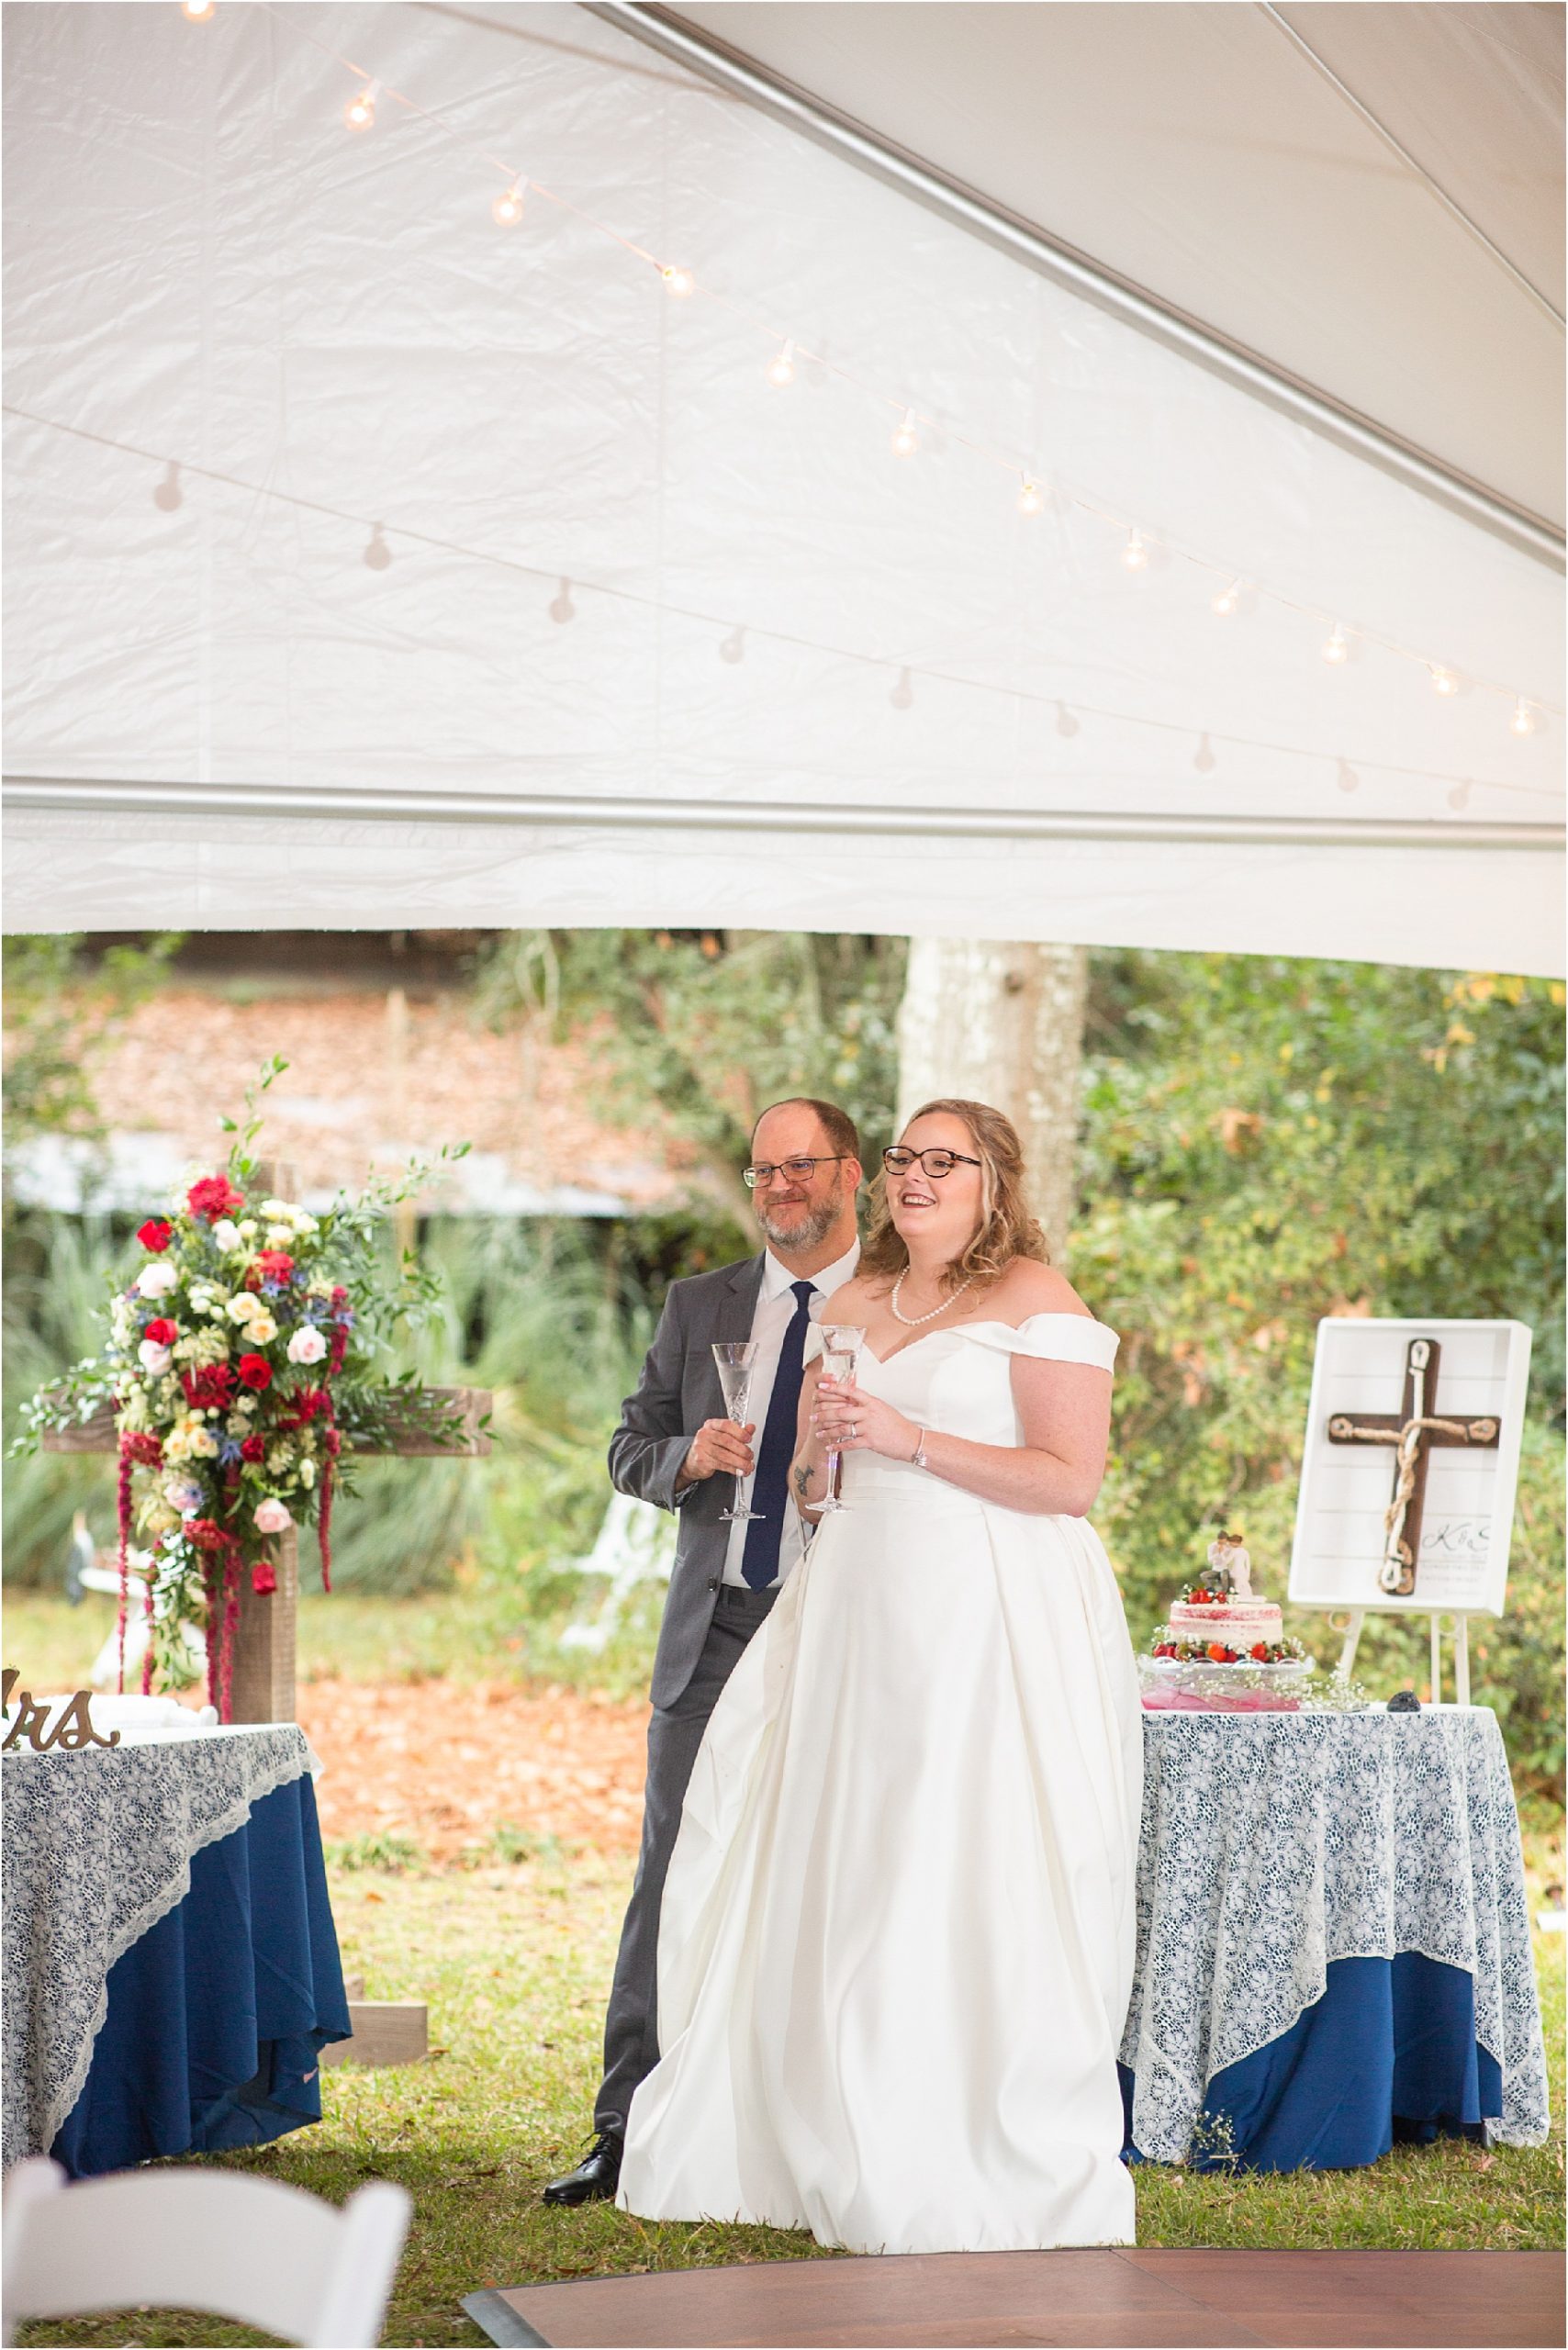 newlywed couple stands during toasts at reception